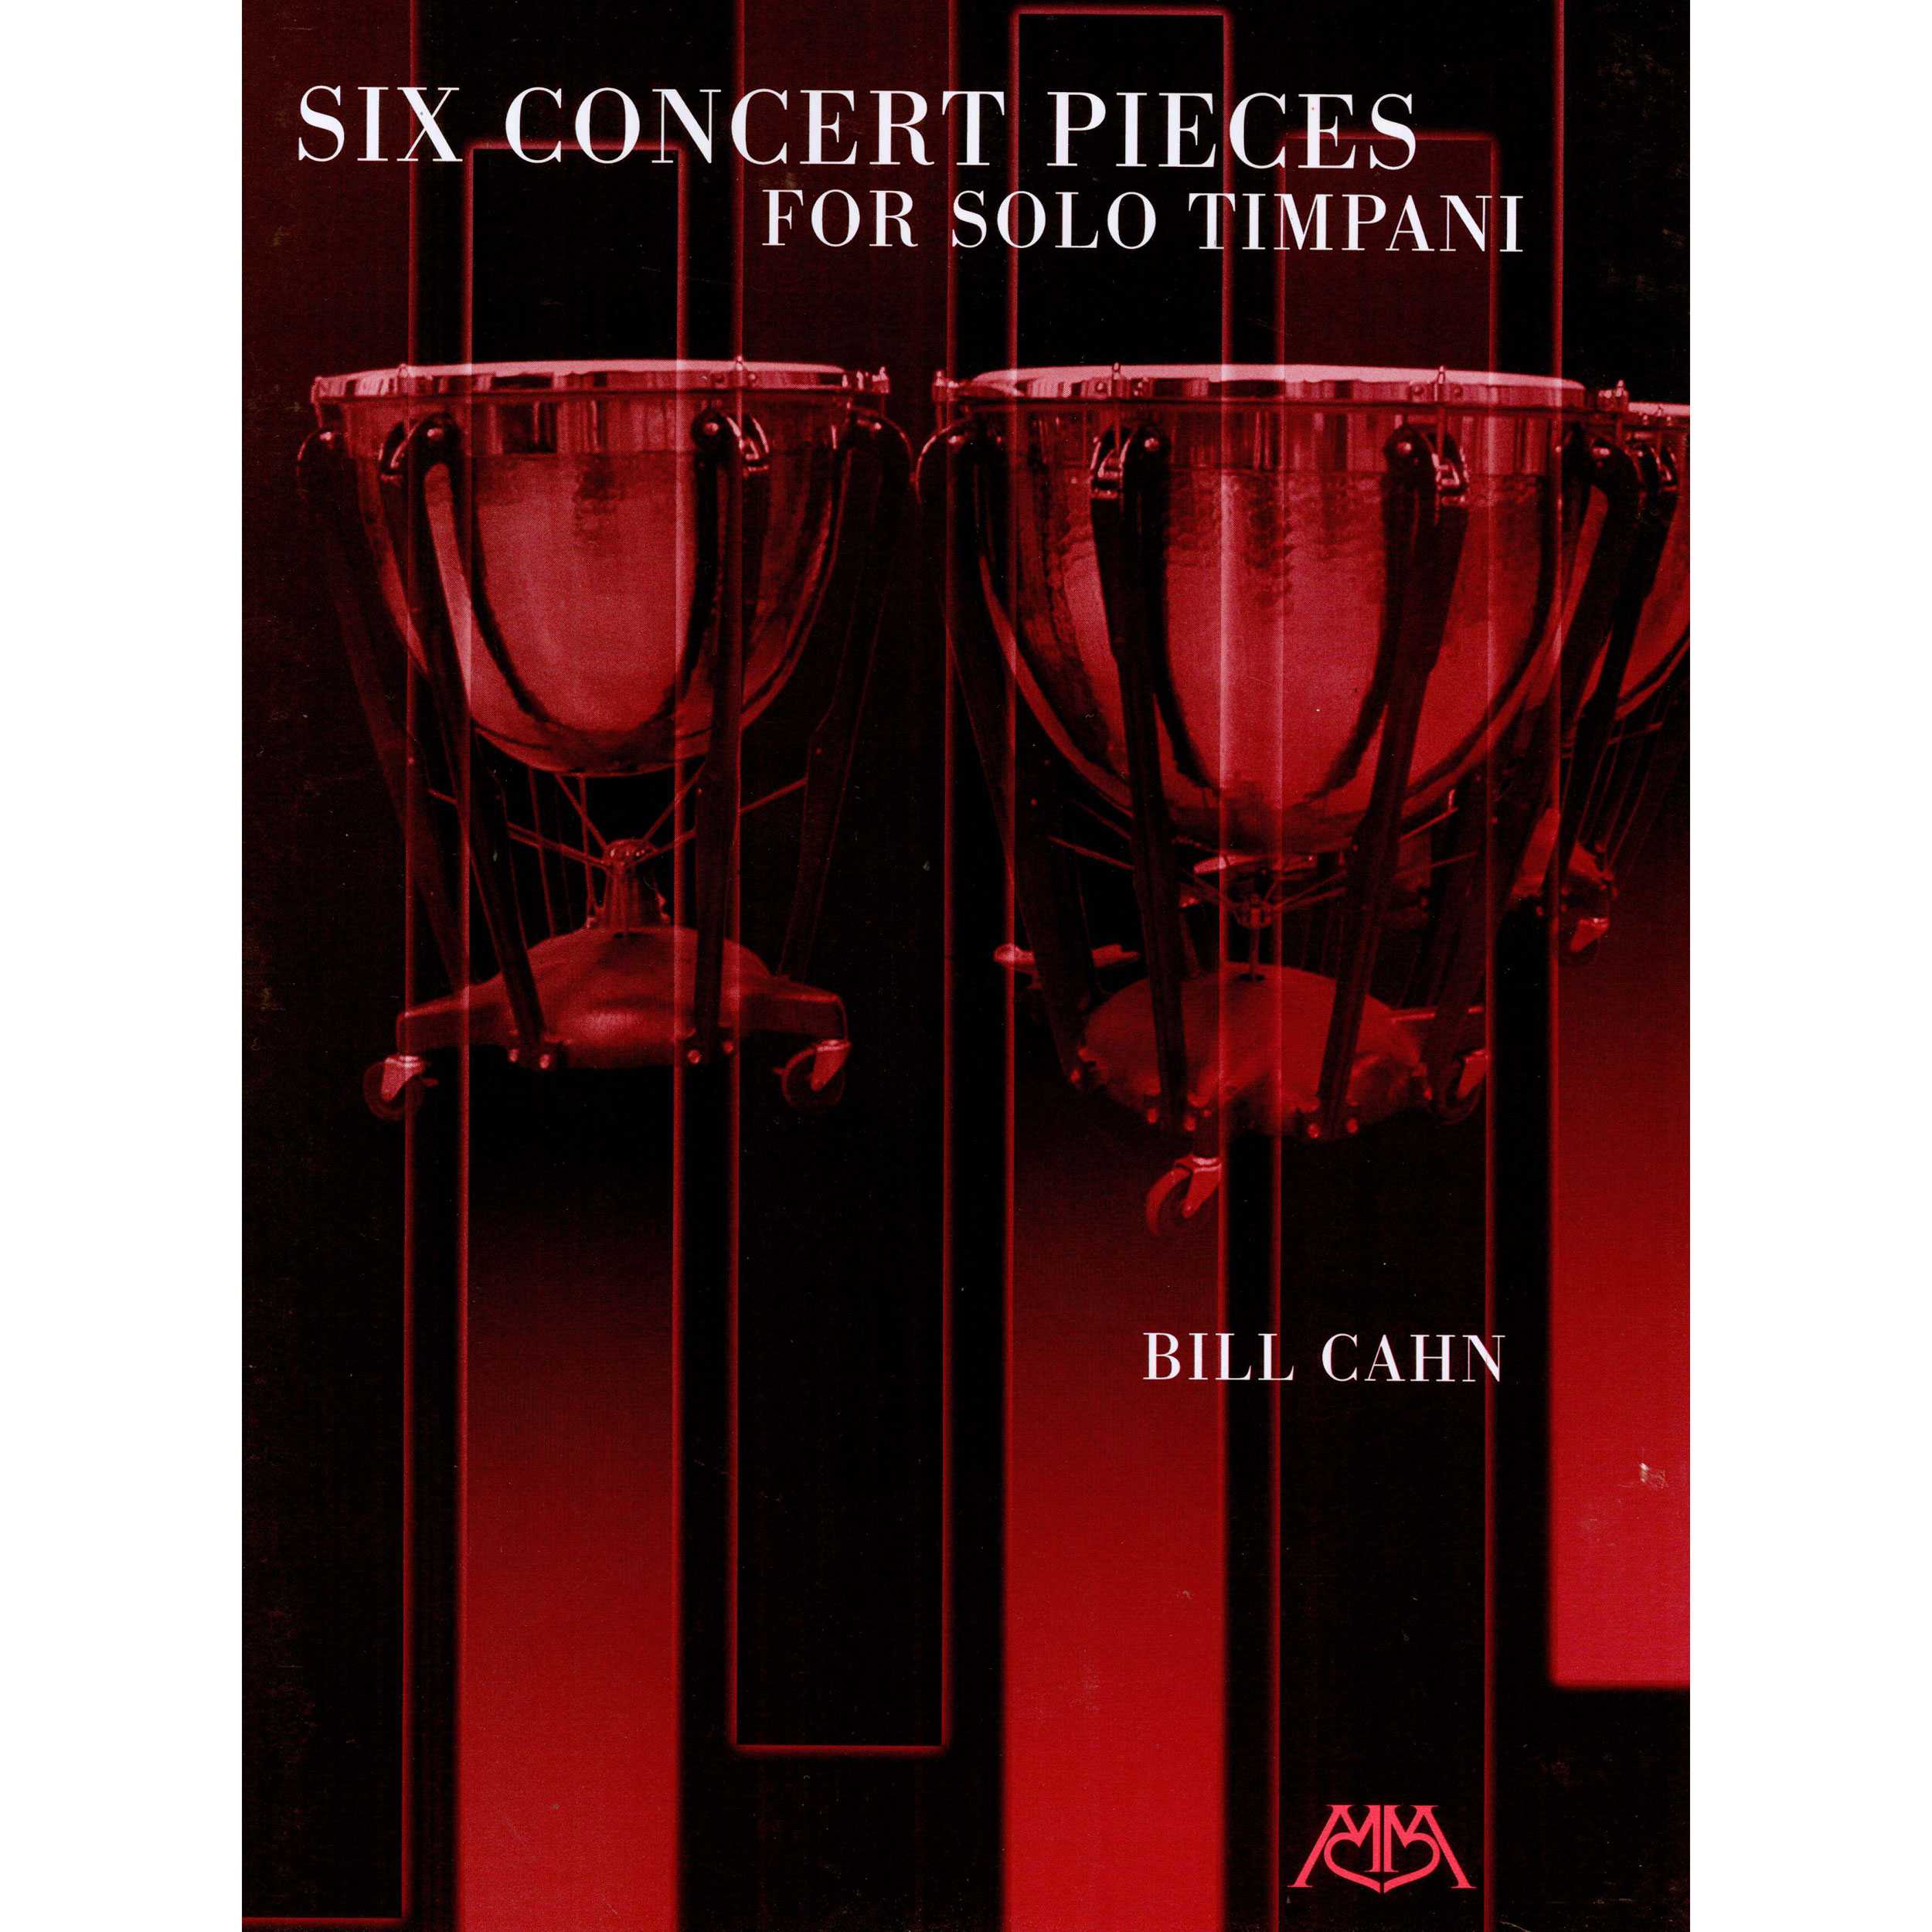 Six Concert Pieces for Solo Timpani by William L. Cahn